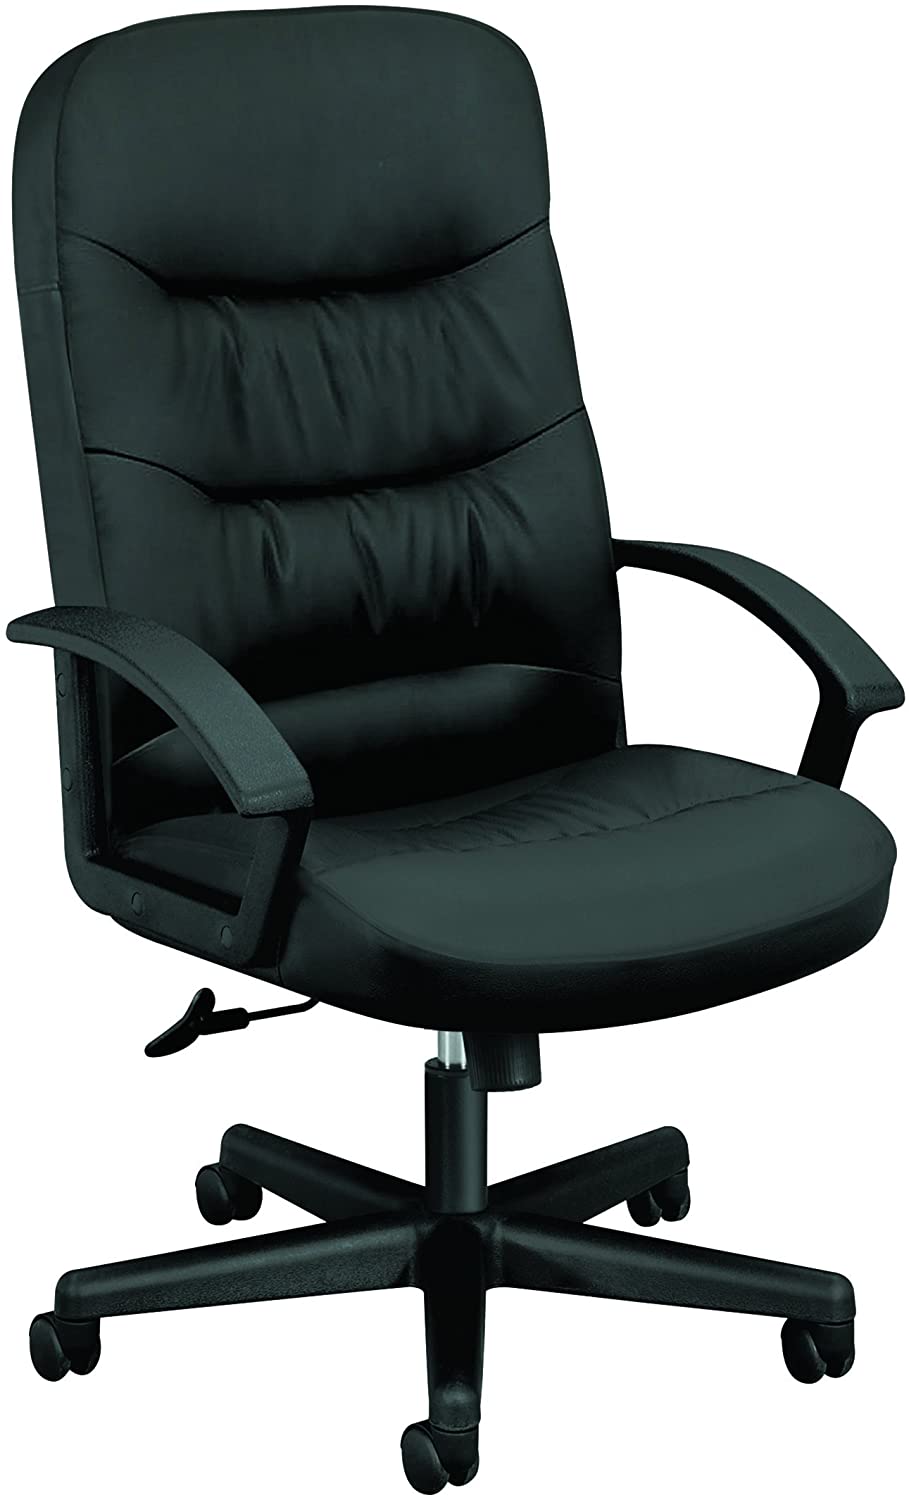 HON Charge Leather Executive Chair - High Back Armed Office Chair for Computer Desk, Black (HVL641)